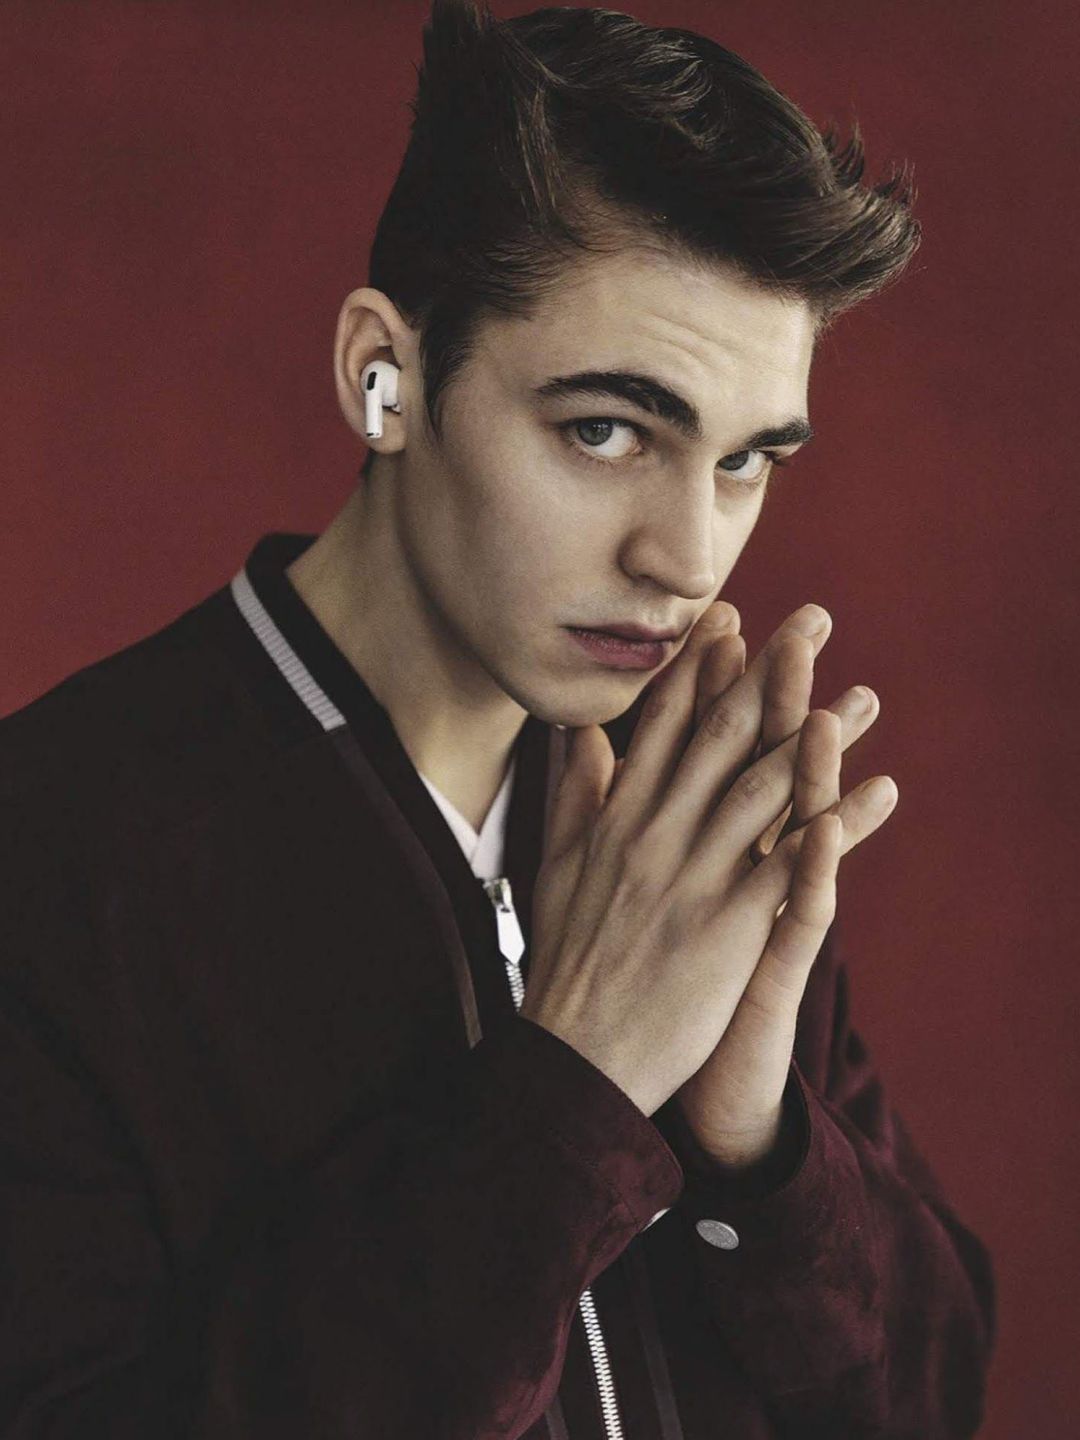 Hero Fiennes-Tiffin young photos